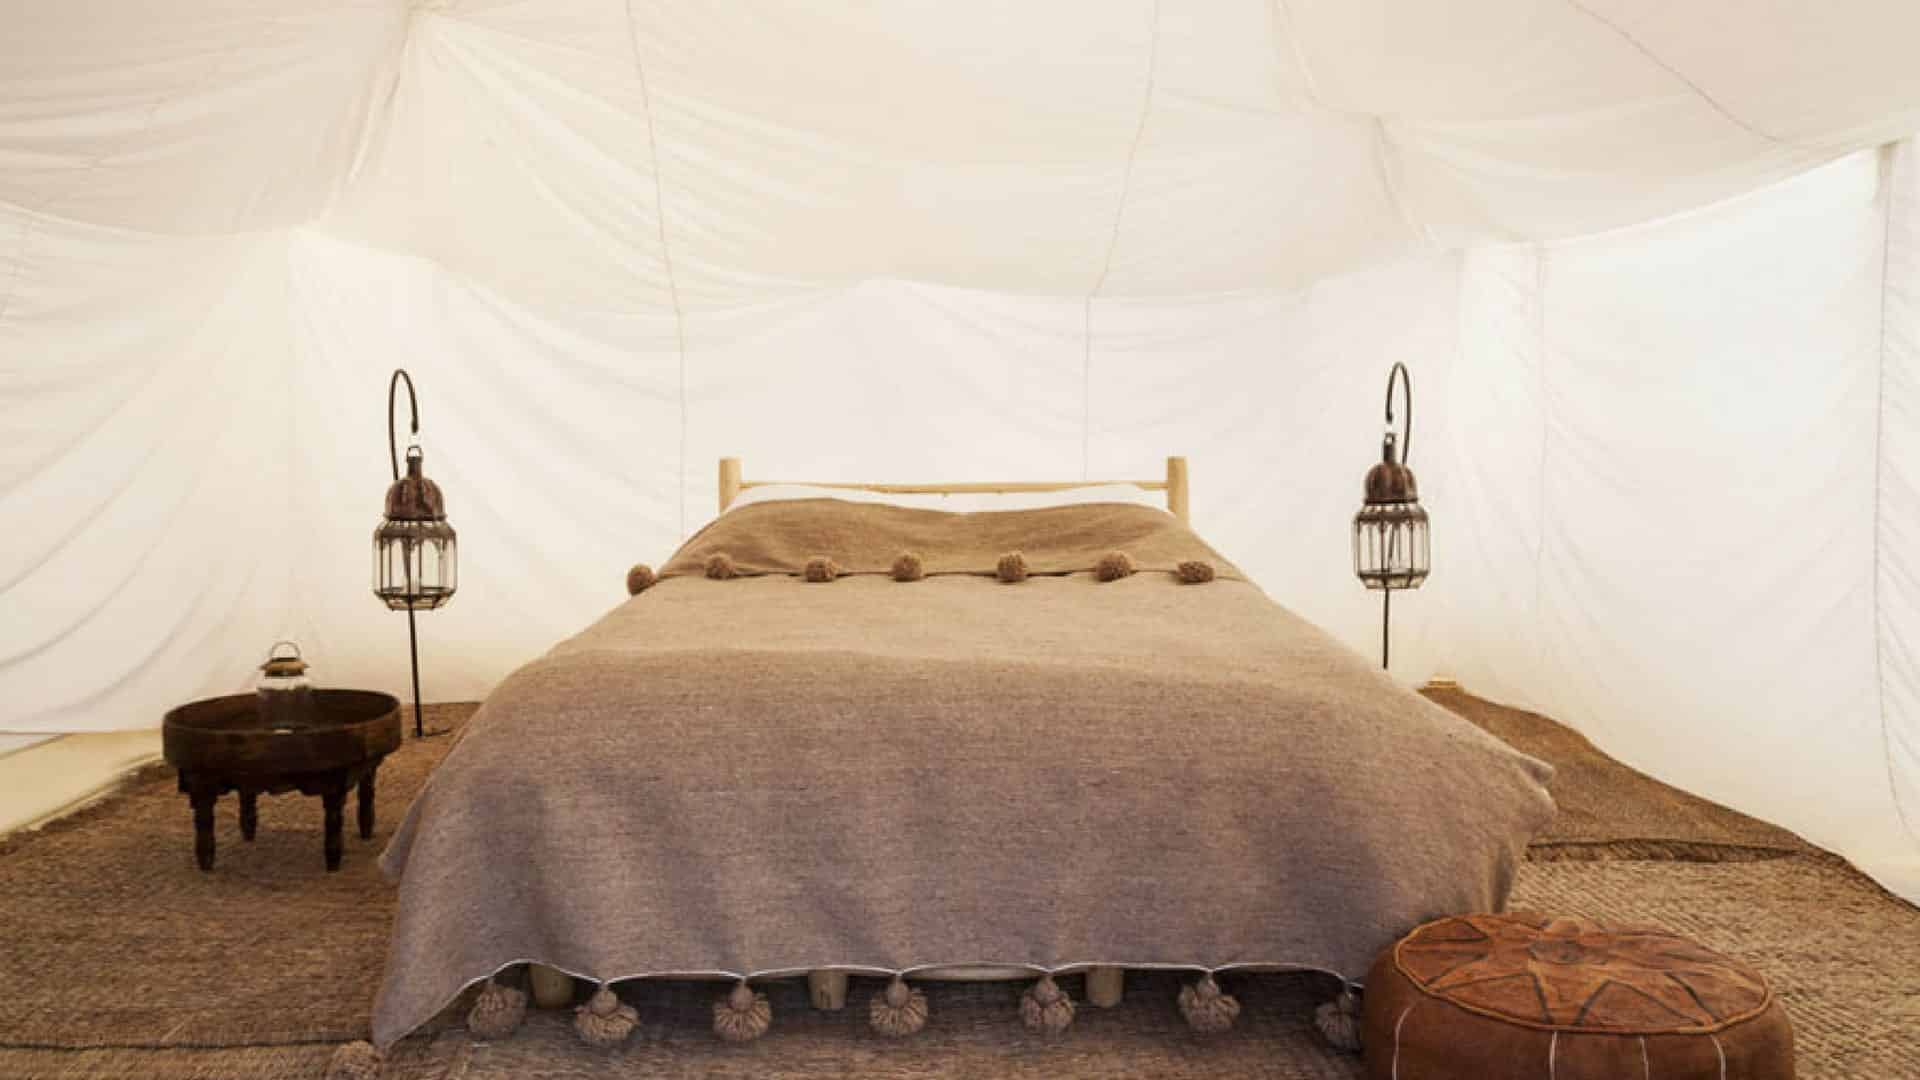 A bed in a tented room at Scarabeo Camp